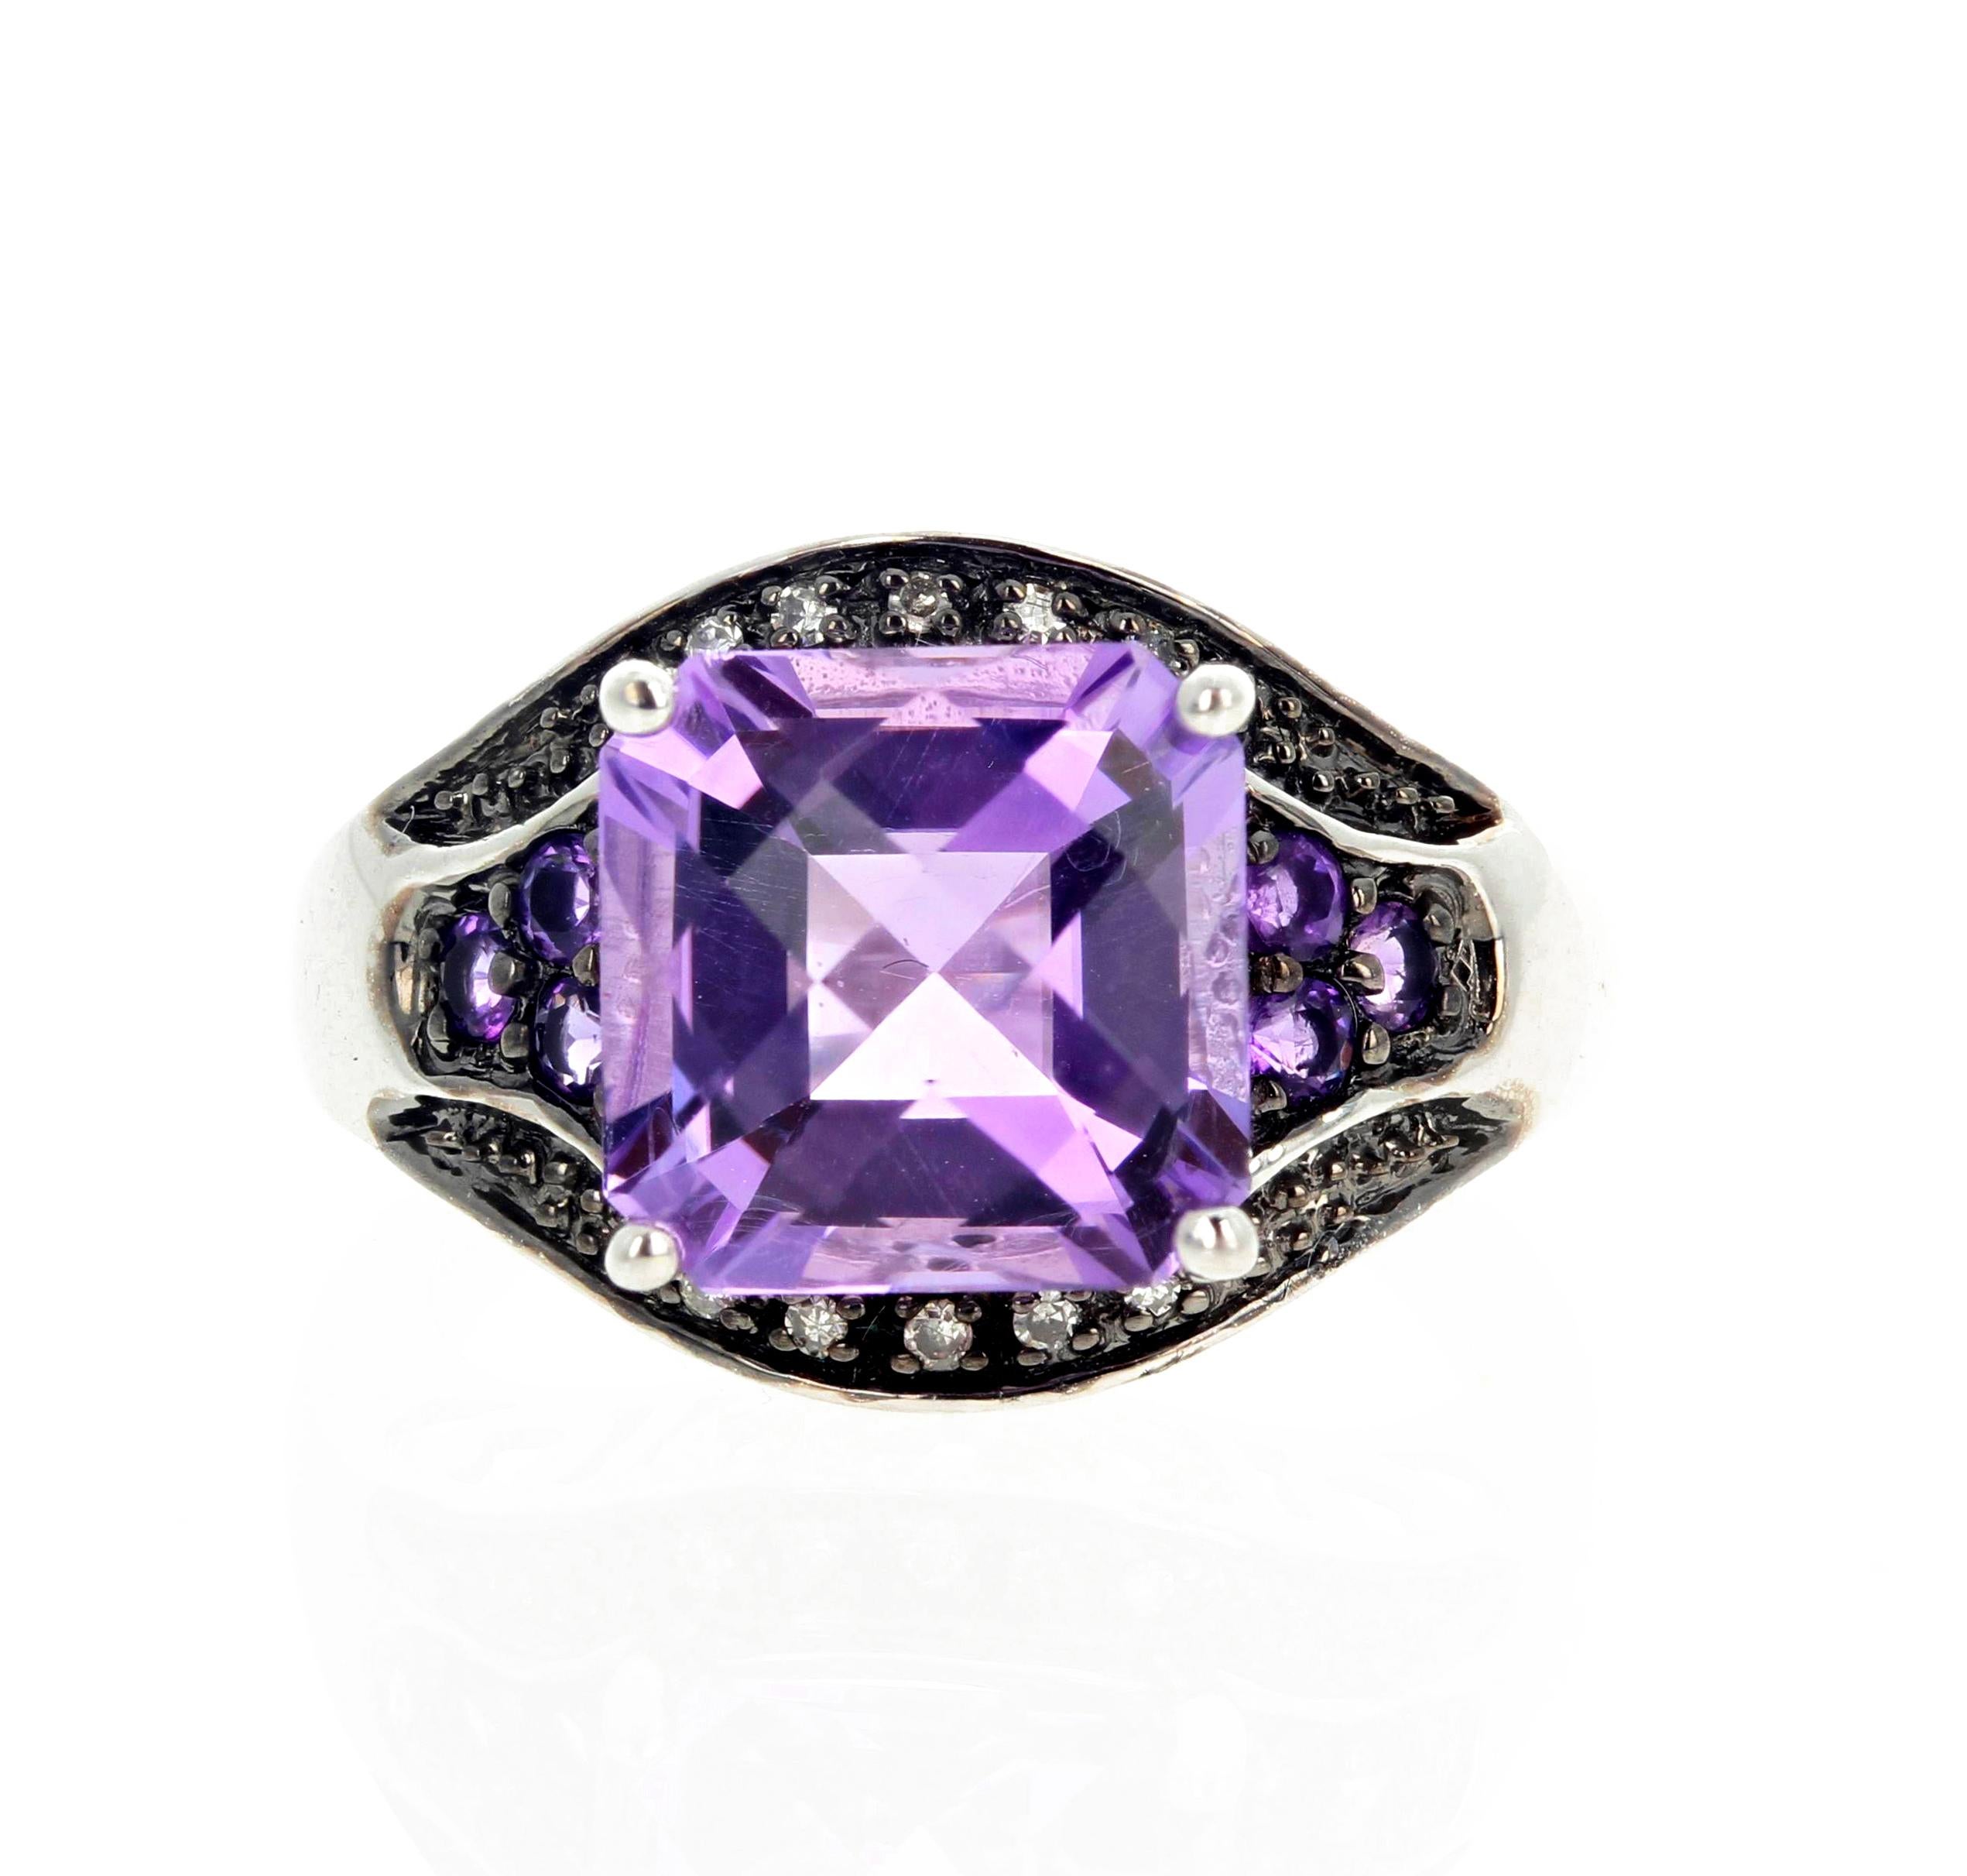 This brilliant checkerboard gem cut 10 carat Amethyst is enhanced with smaller Amethyst side stones and .05 carats of white sparkling Diamonds set in a rhodium plated Sterling Silver ring. .  The ring is a size 7 (sizable FOR FREE).  This is truly